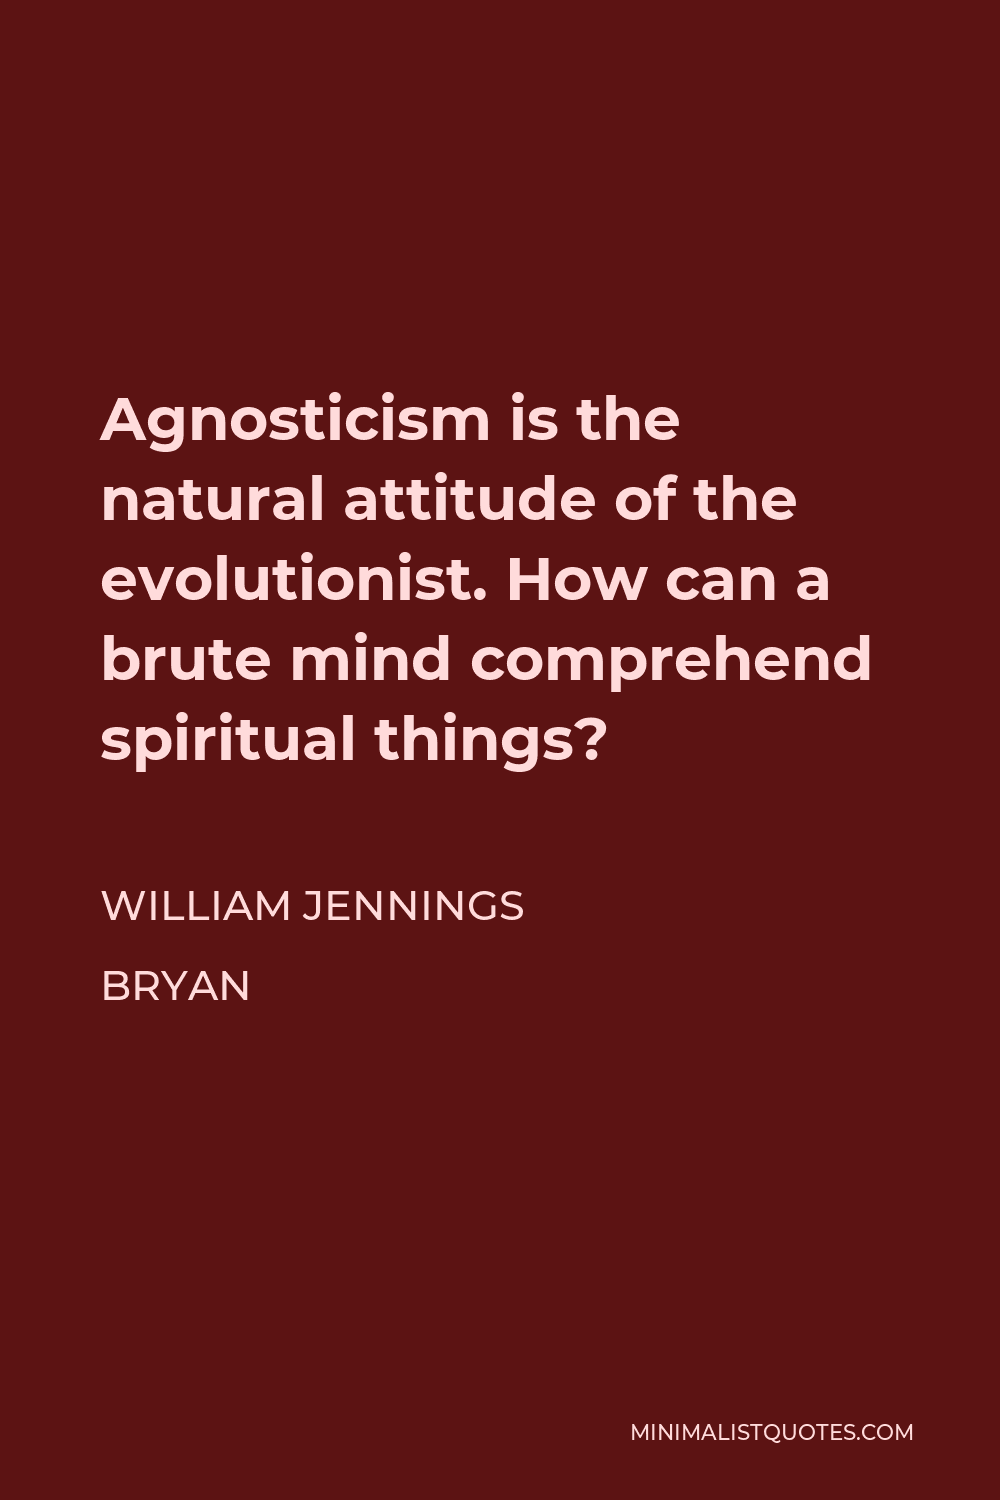 William Jennings Bryan Quote - Agnosticism is the natural attitude of the evolutionist. How can a brute mind comprehend spiritual things?